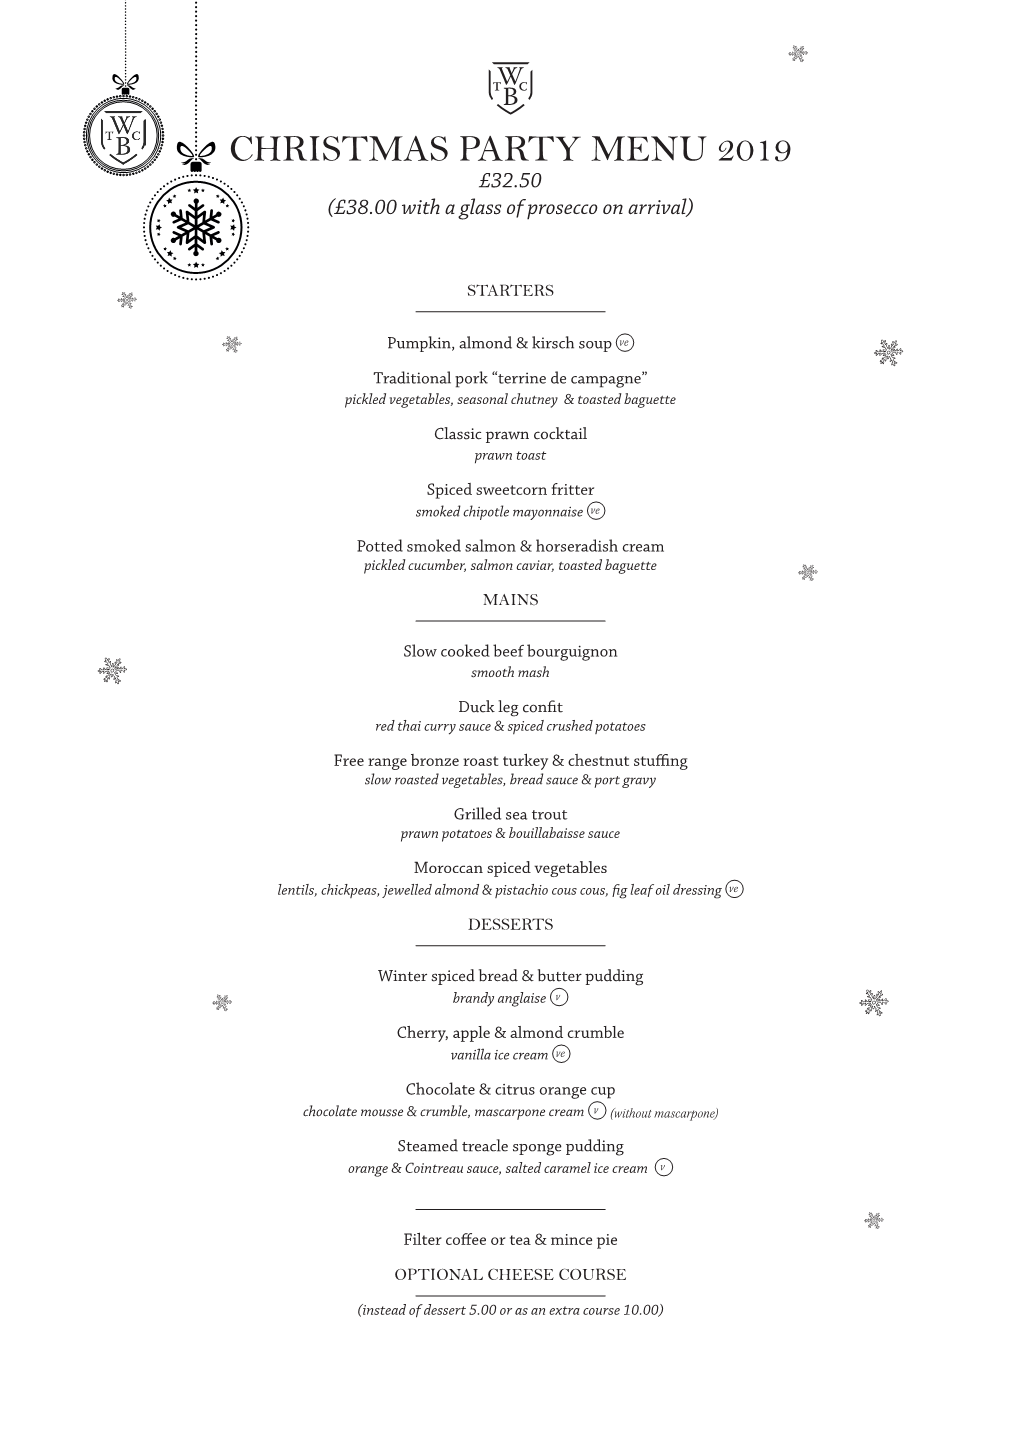 CHRISTMAS PARTY MENU 2019 £32.50 (£38.00 with a Glass of Prosecco on Arrival)